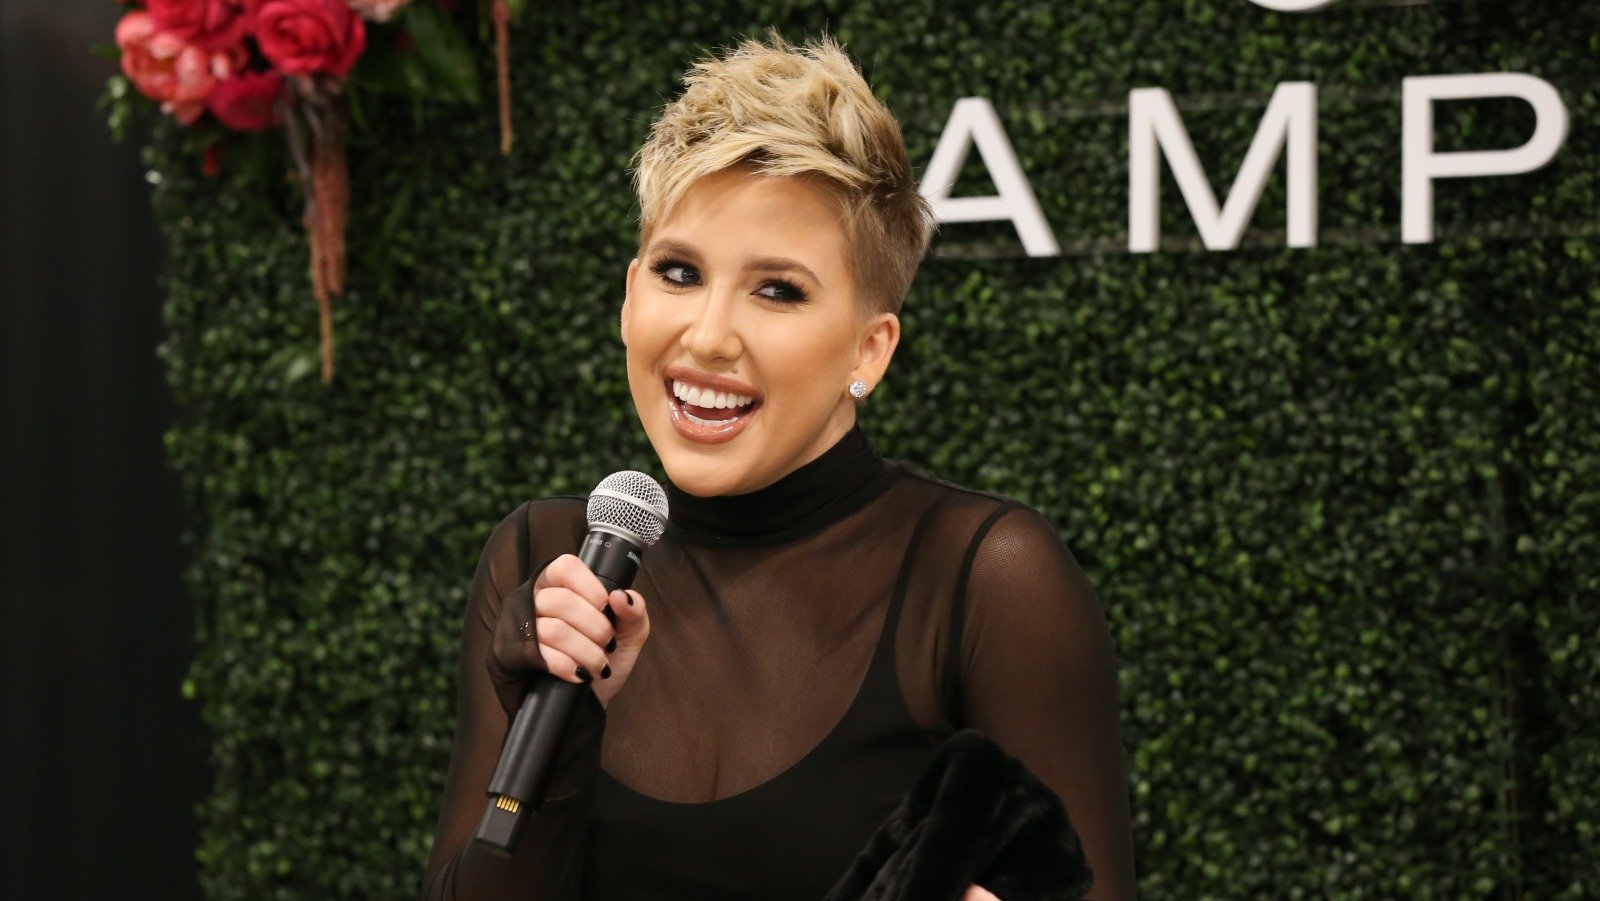 What Savannah Chrisley Really Looks Like Underneath All That Makeup - The List